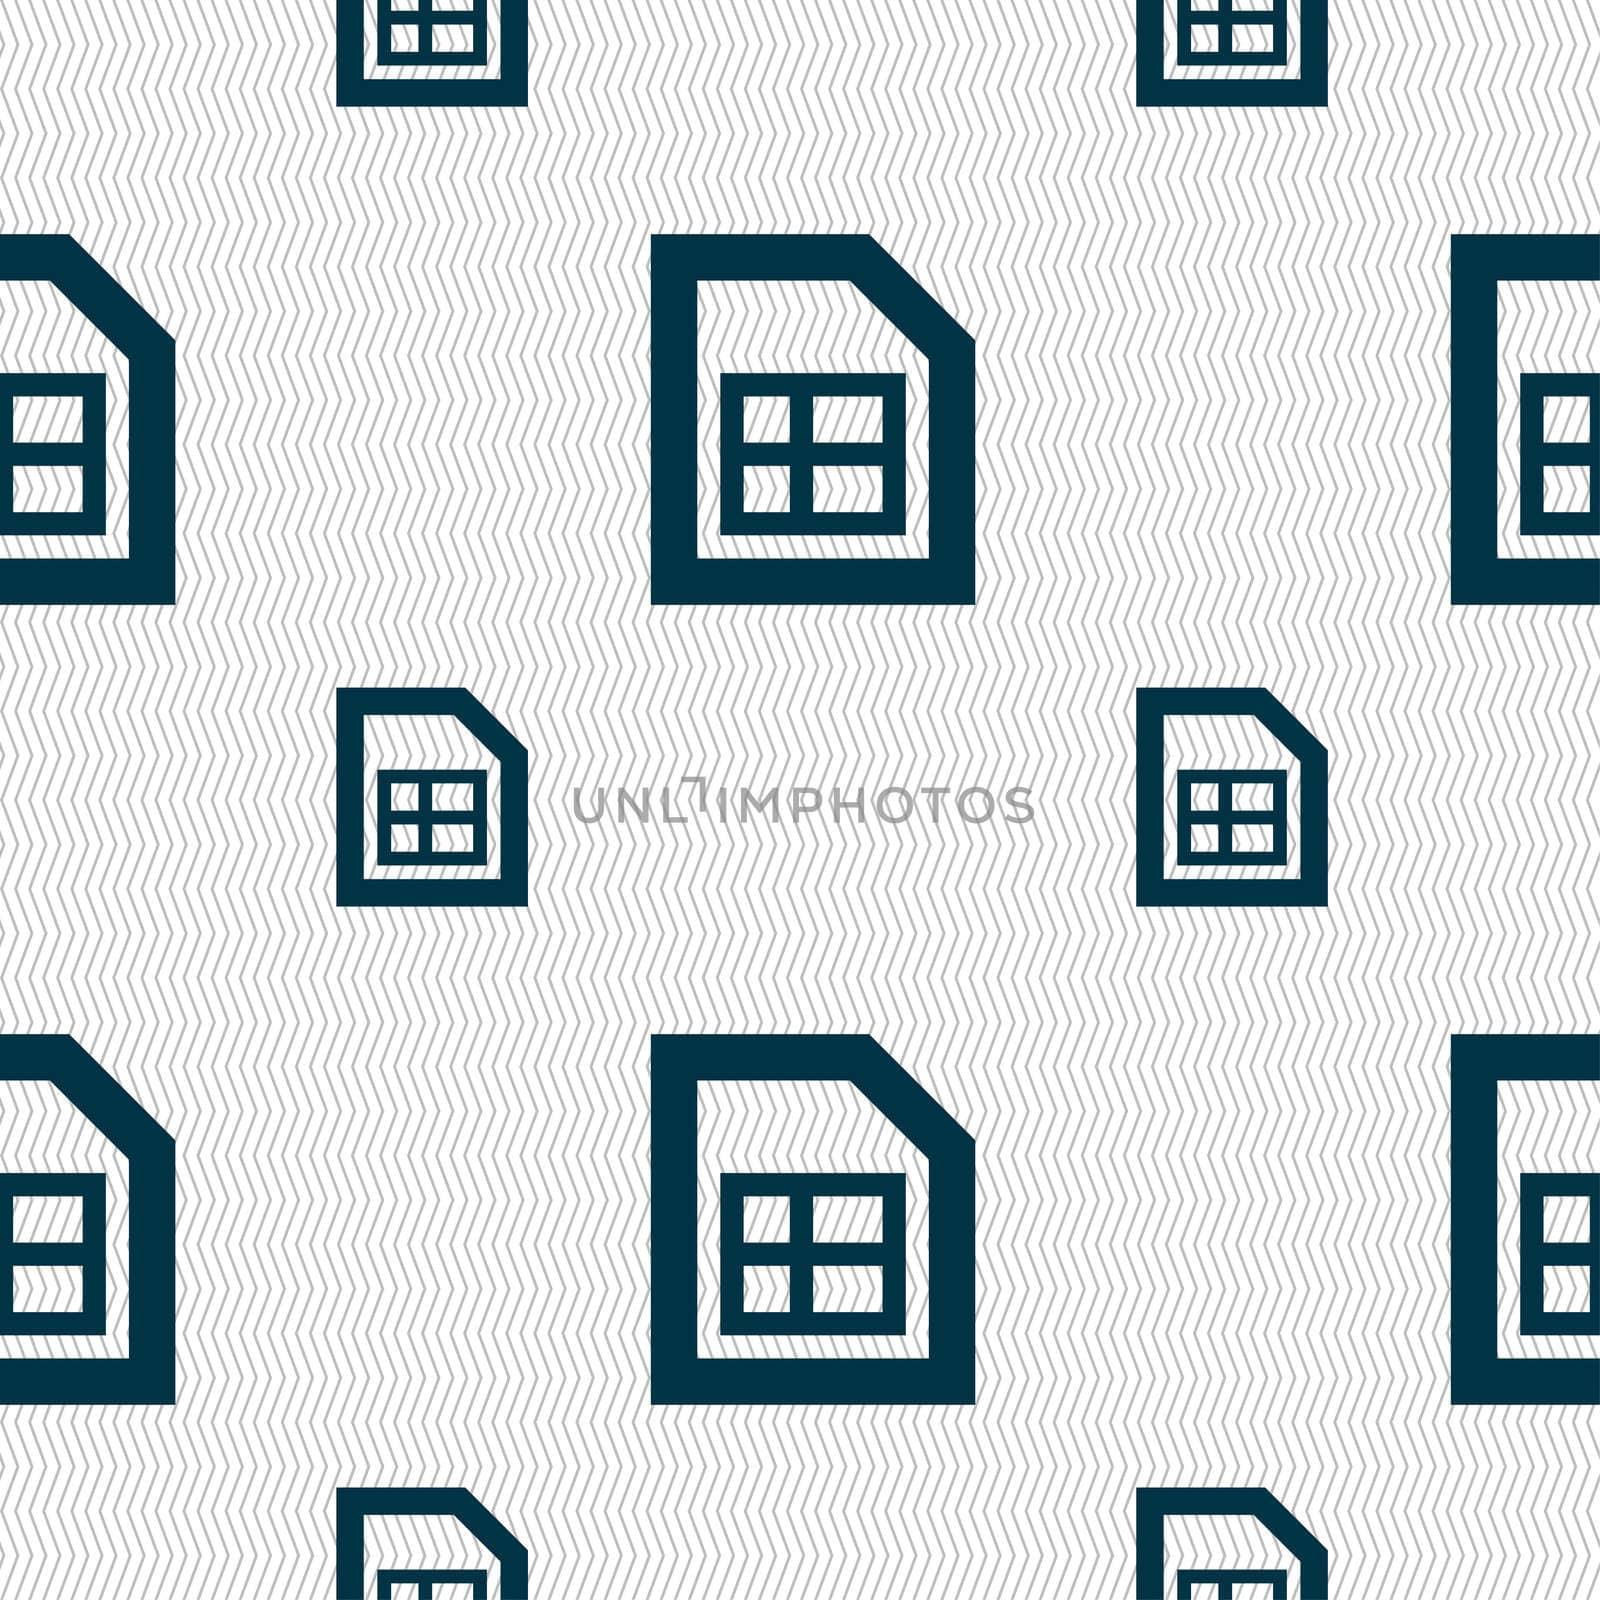  File document icon sign. Seamless pattern with geometric texture. illustration